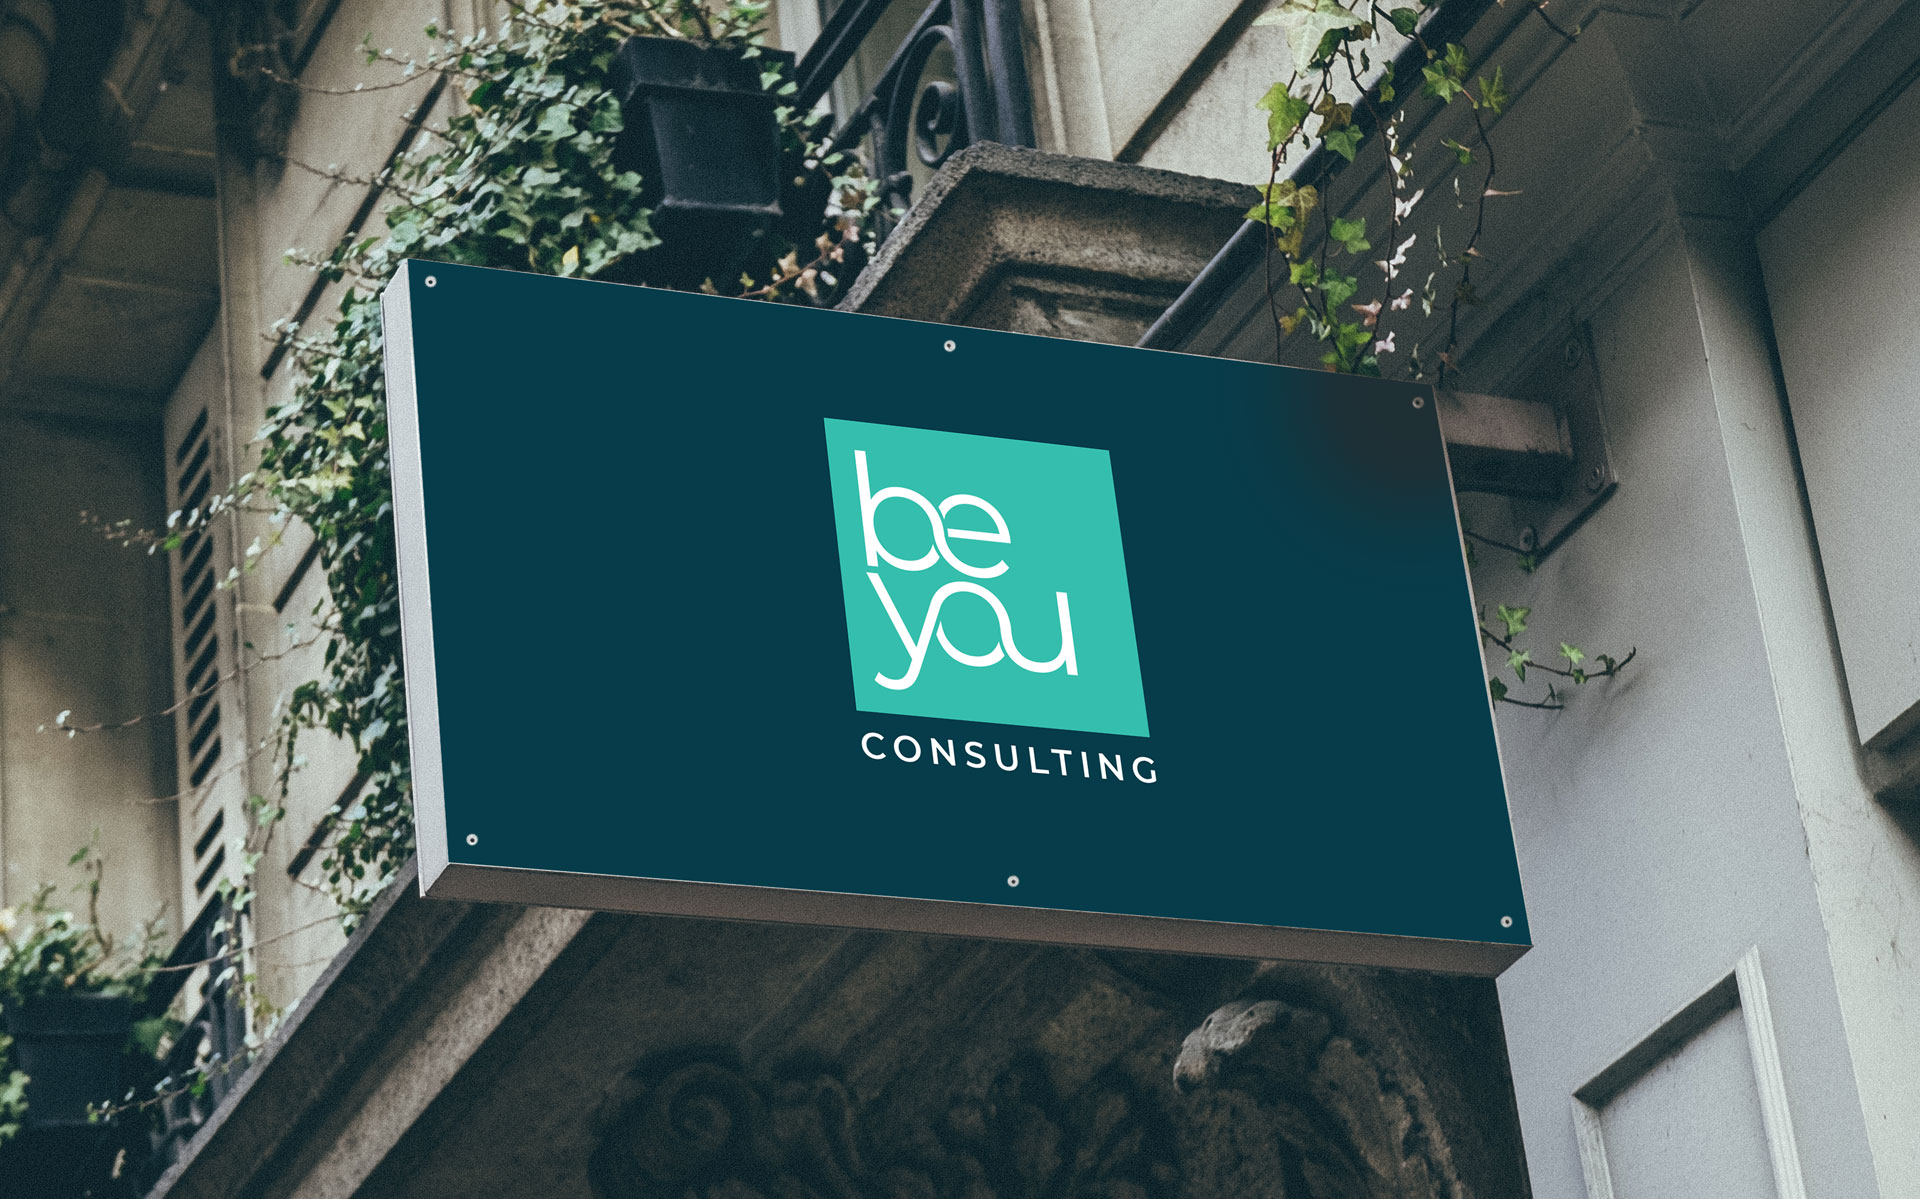 Be You Consulting logo, branding & marketing items designed by Amy at Yellow Sunday